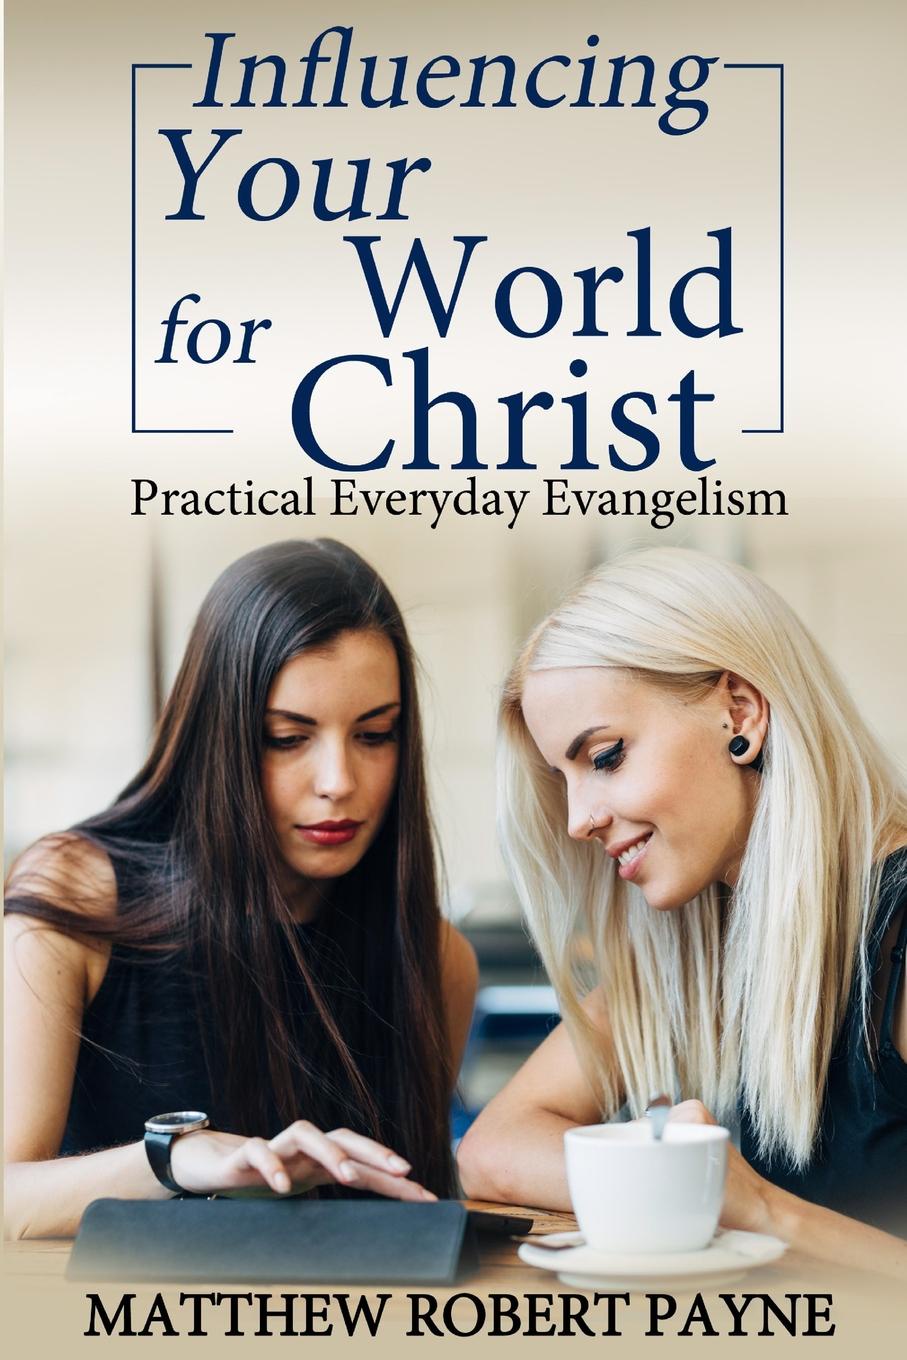 Influencing Your World FOR Christ. Practical Everyday Evangelism